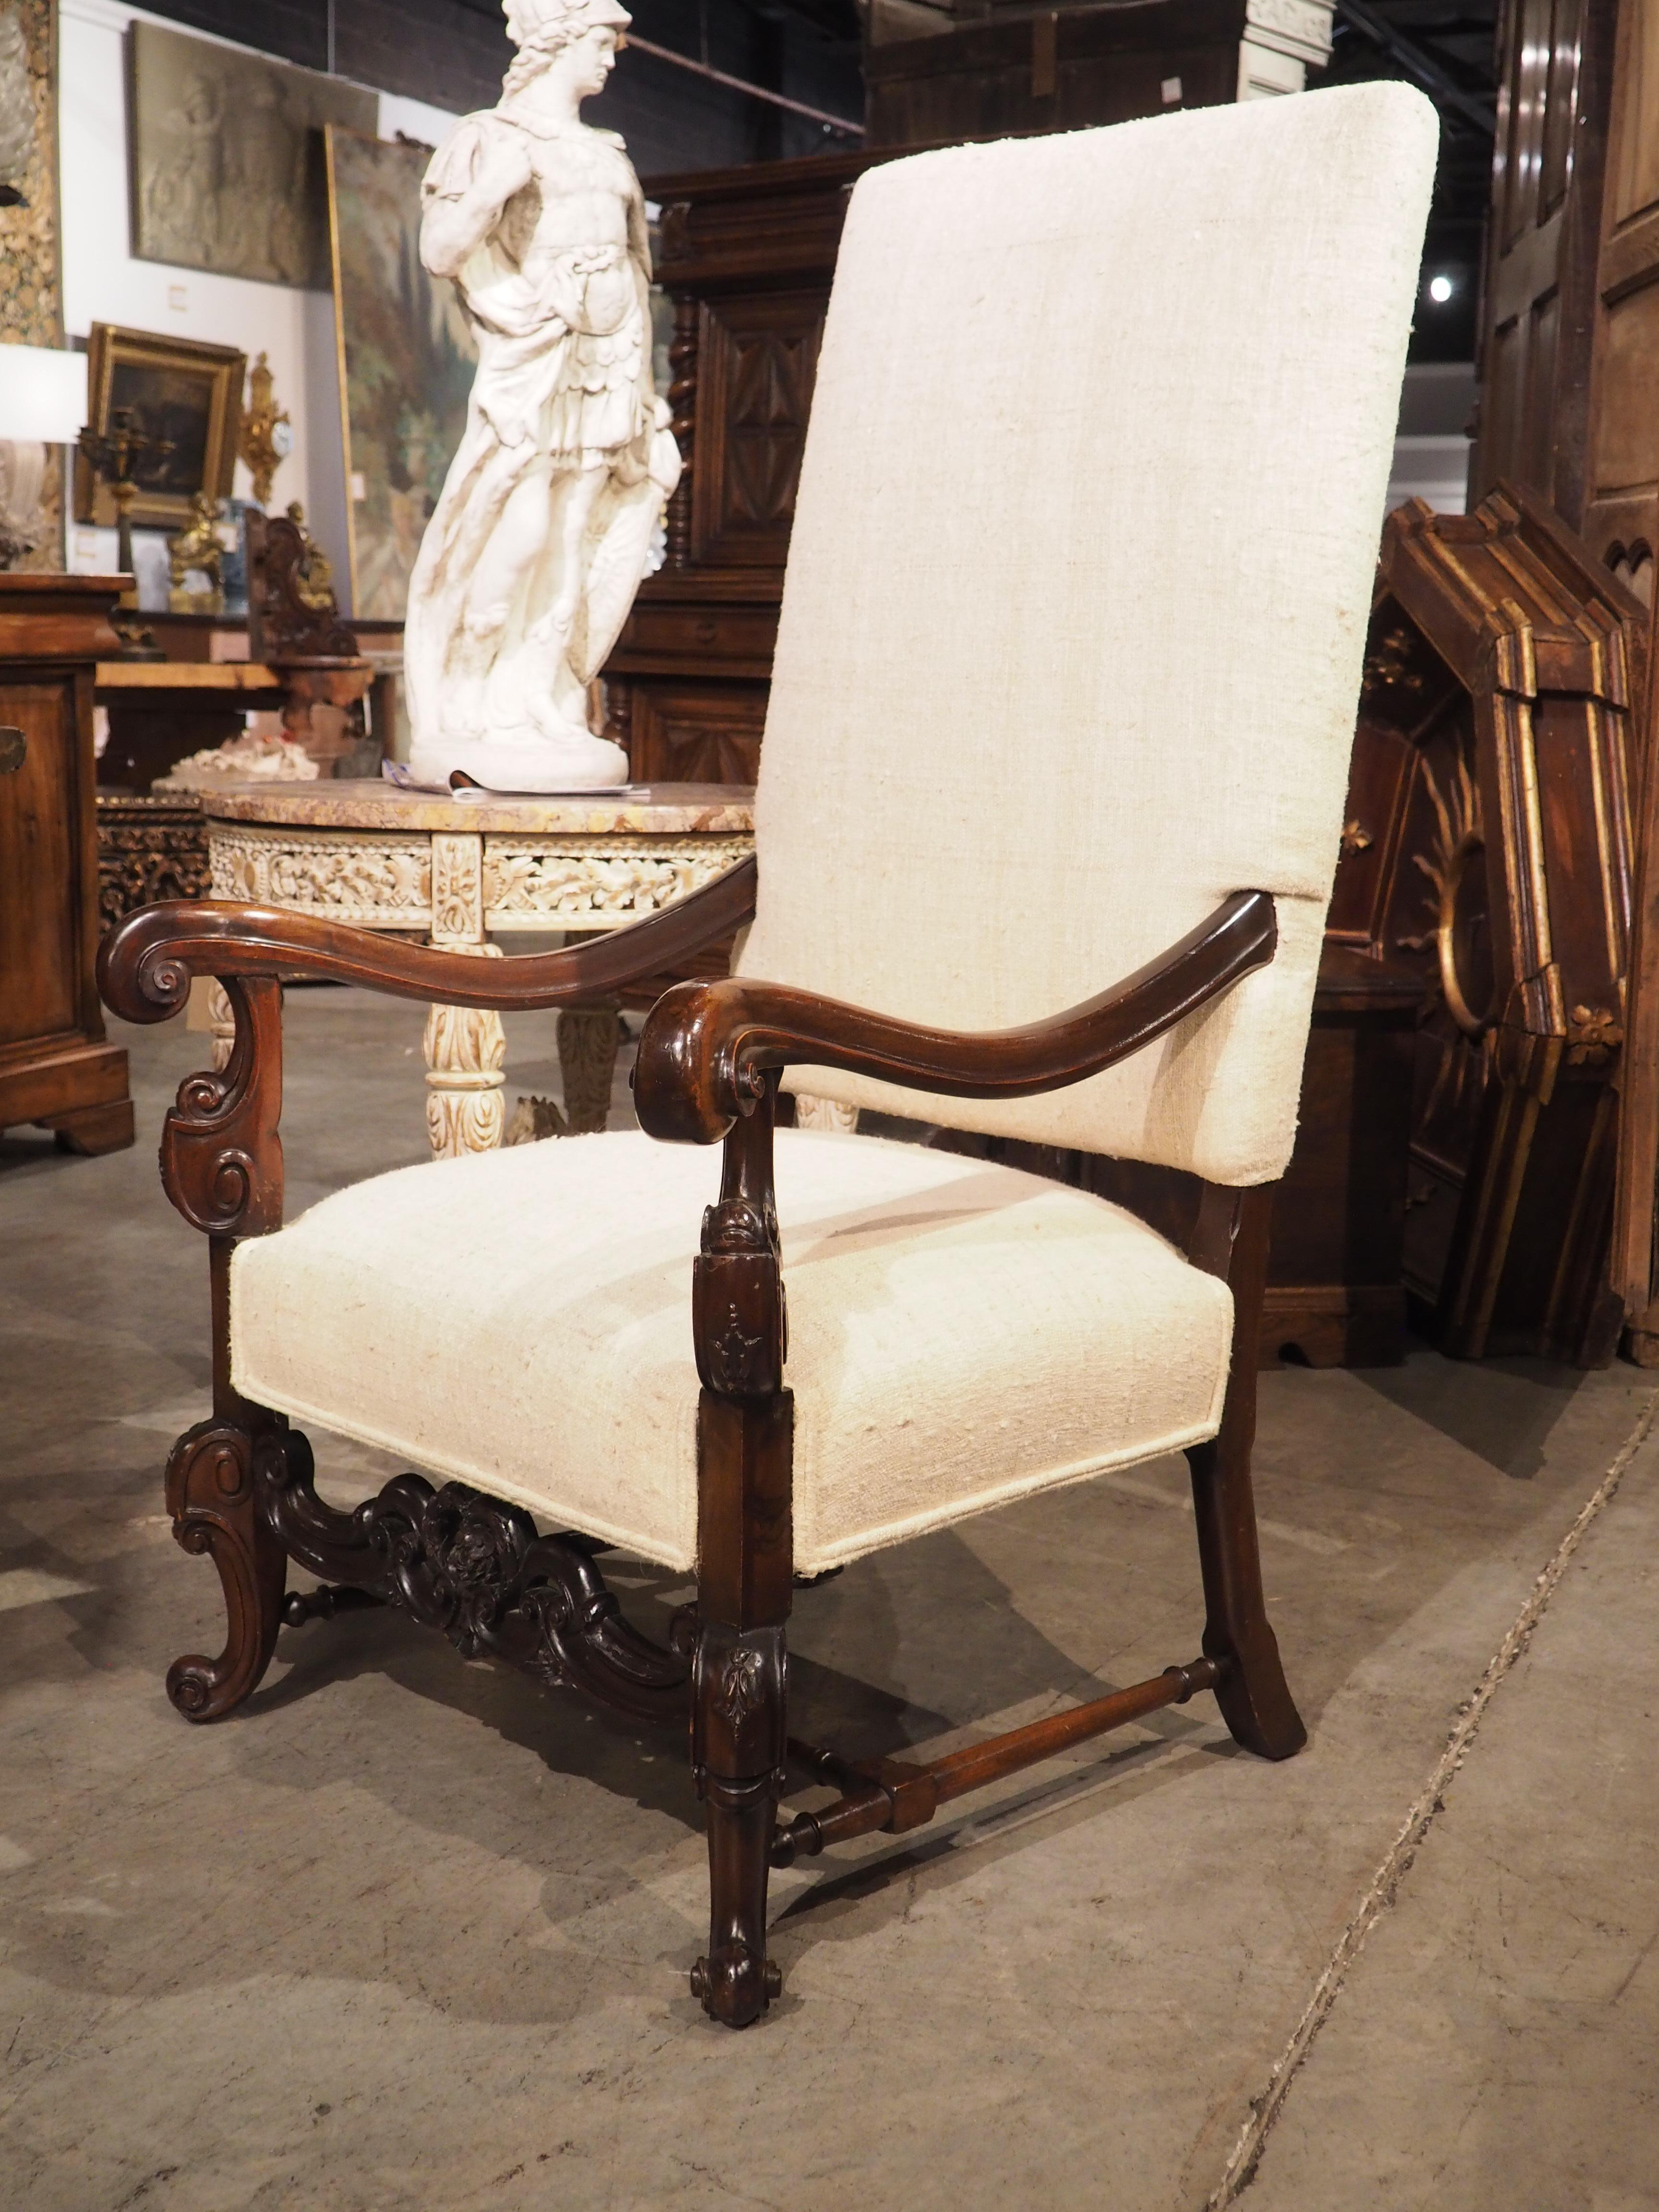 Baroque architecture of the 17th and 18th centuries was known for its highly decorative style, often employing structural elements as sculpted motifs. Baroque furniture, such as this walnut armchair with raw silk upholstery, also utilized this